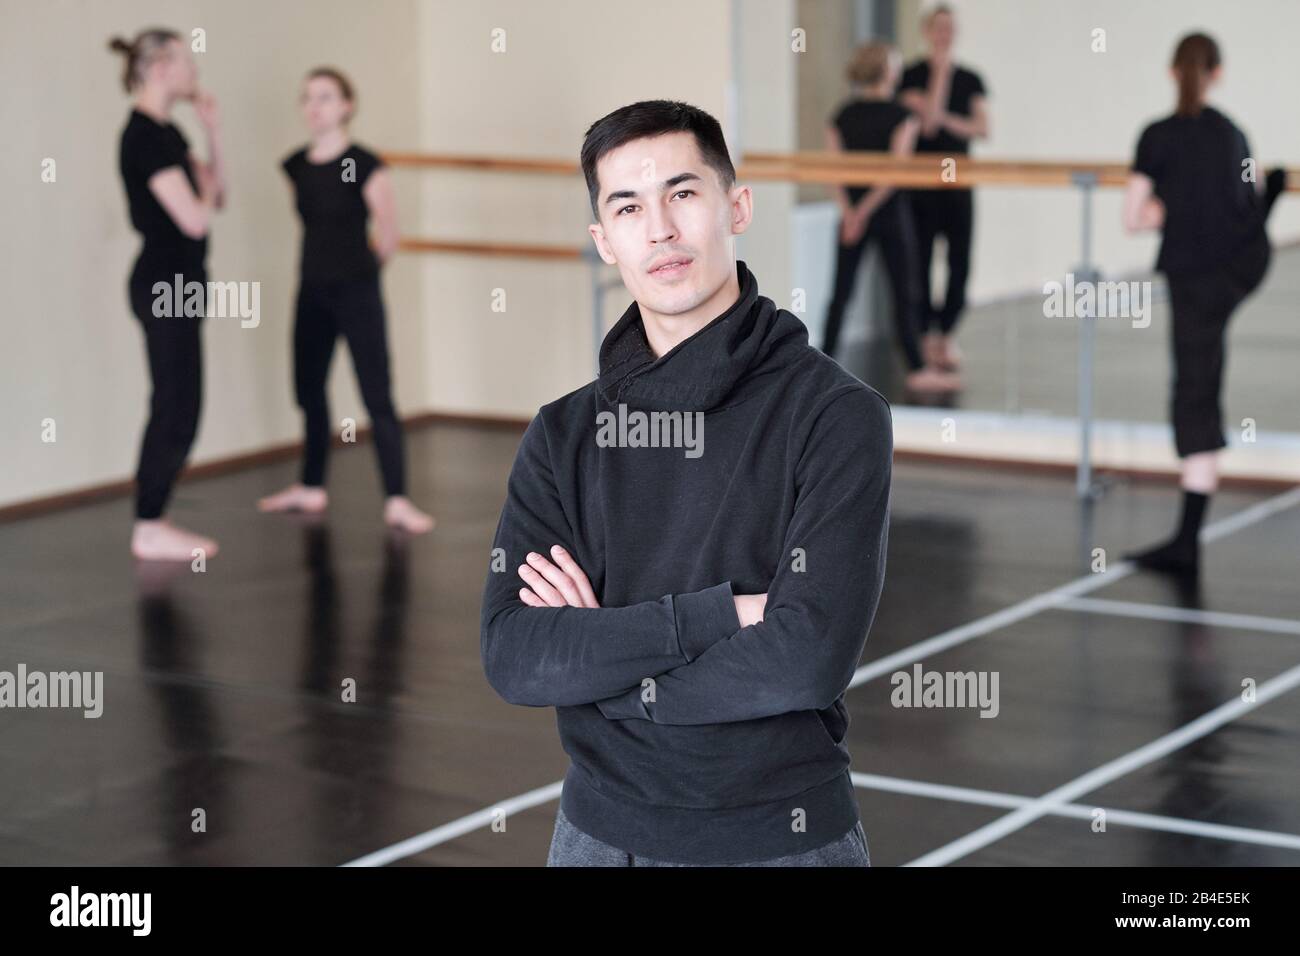 Young confident instructor of modern ballet dancing course crossing arms by chest while standing in front of camera in studio Stock Photo